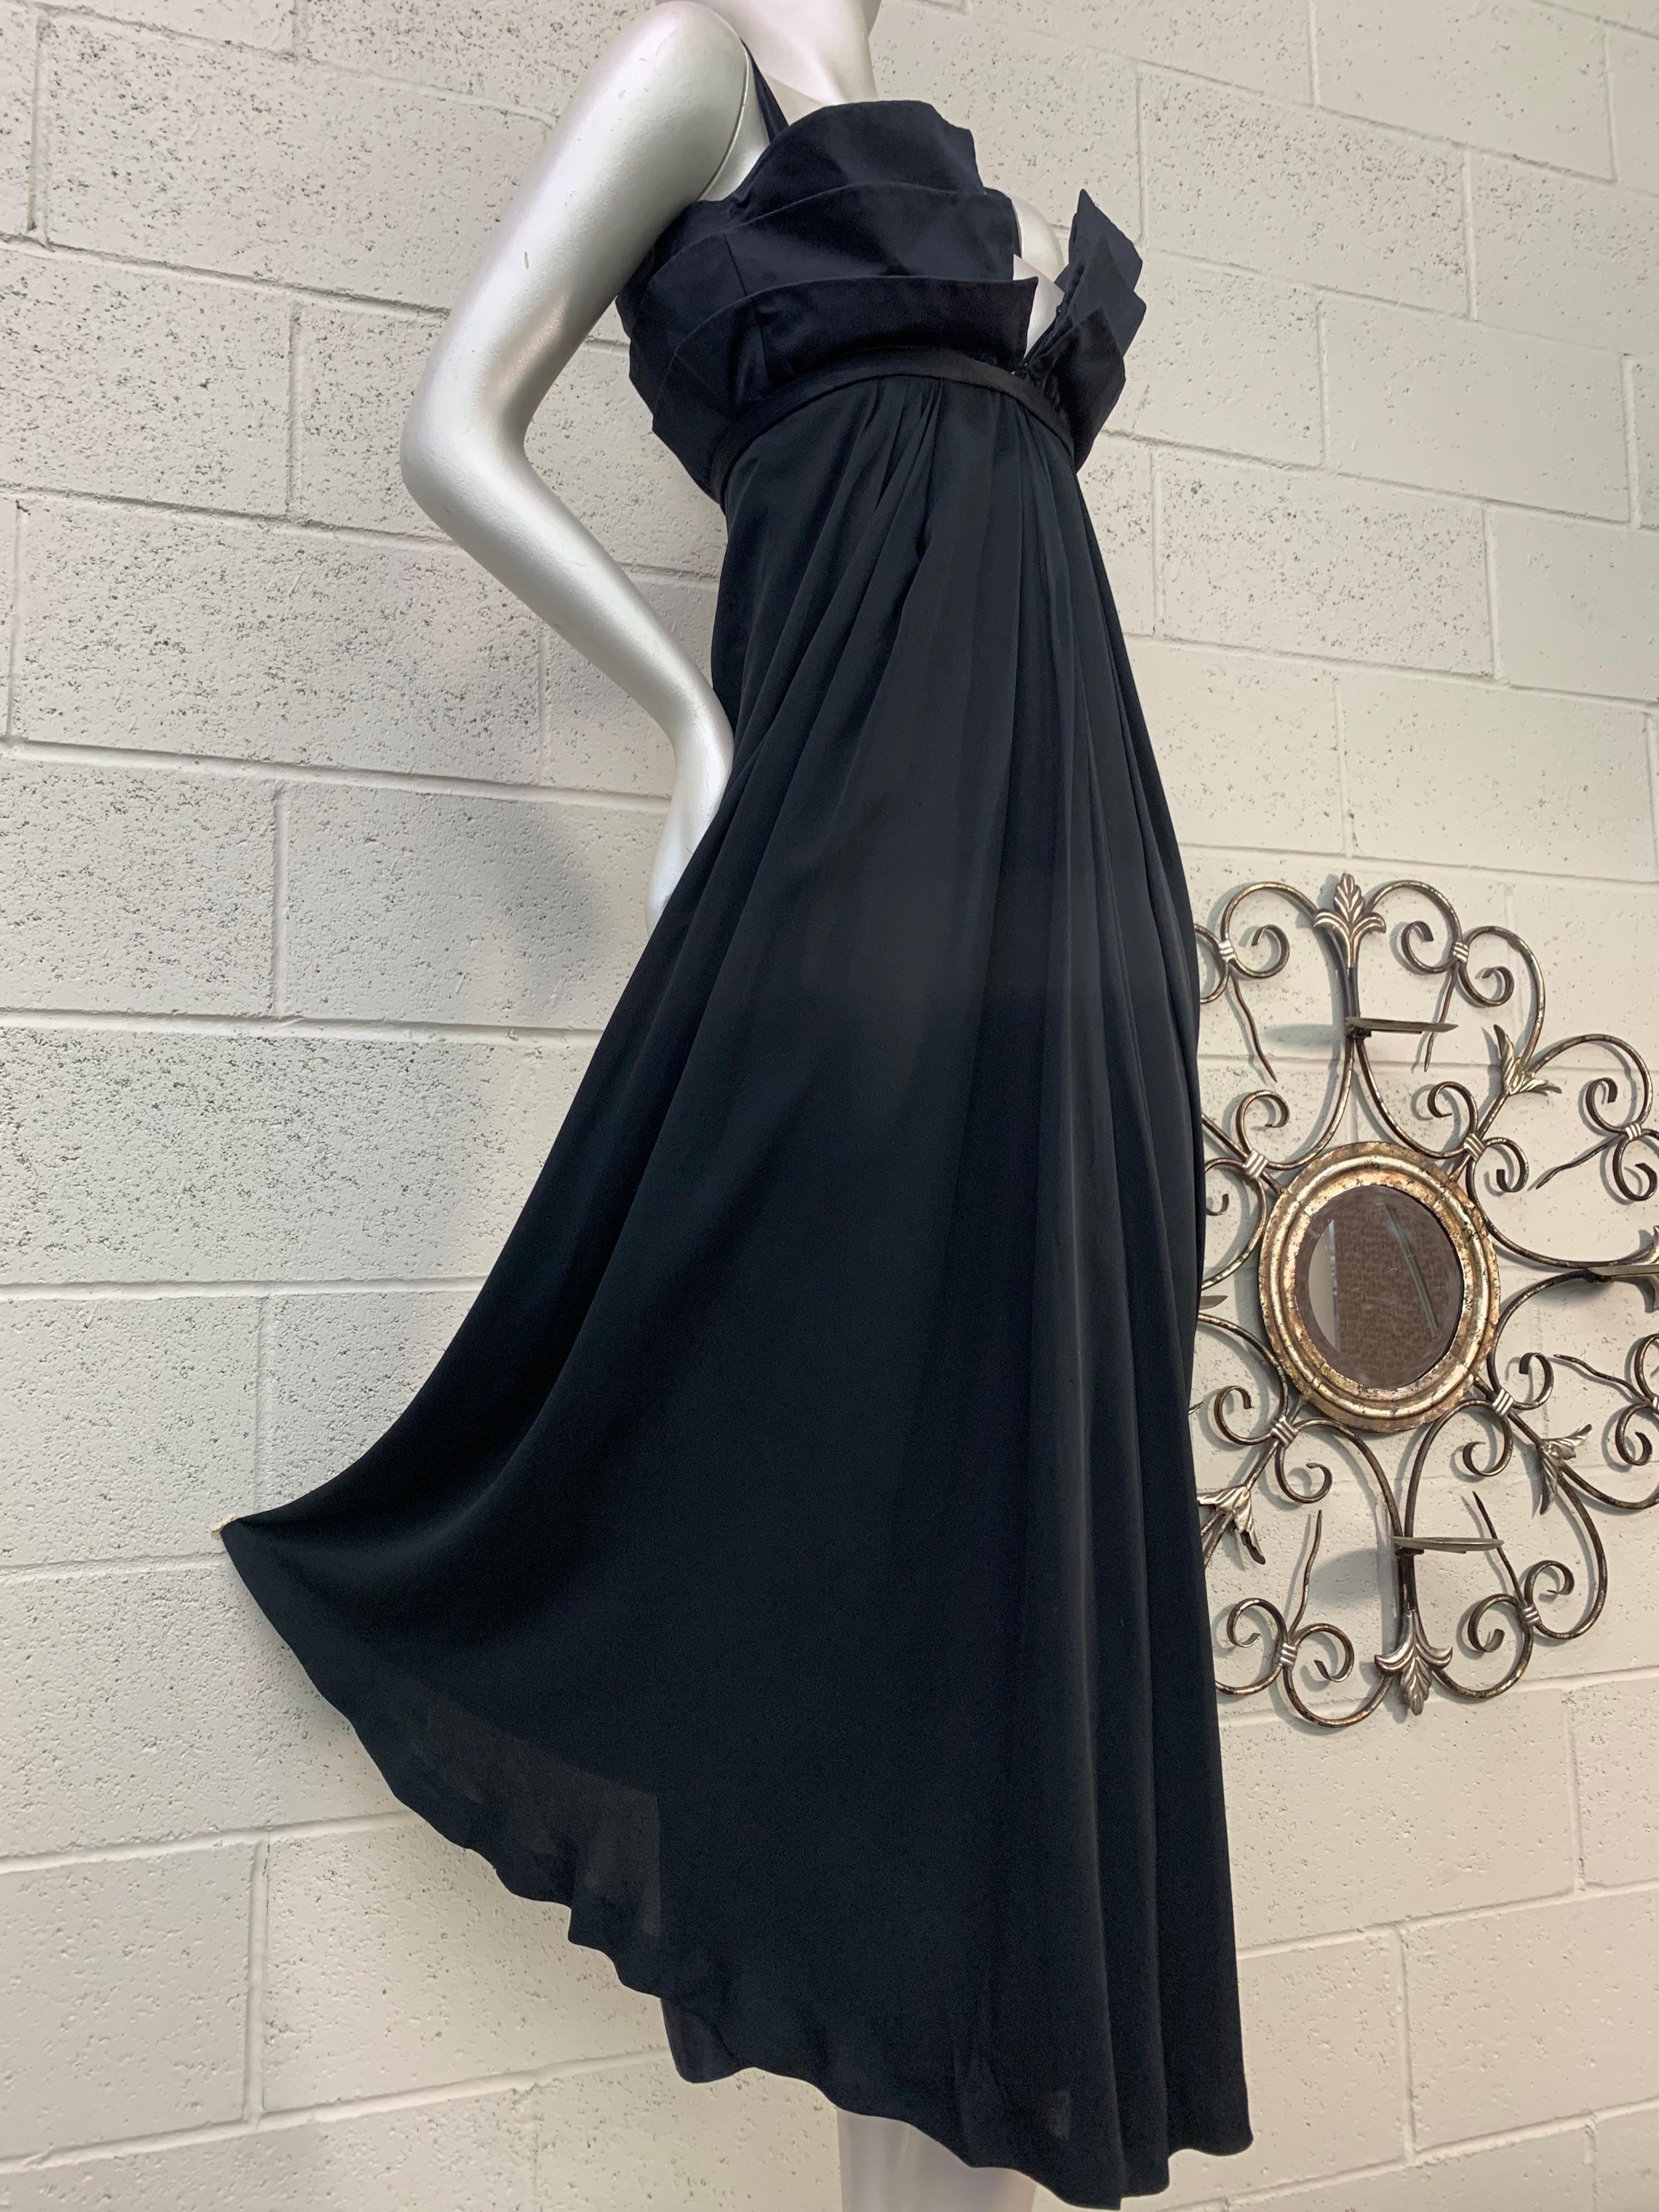 structured black gown